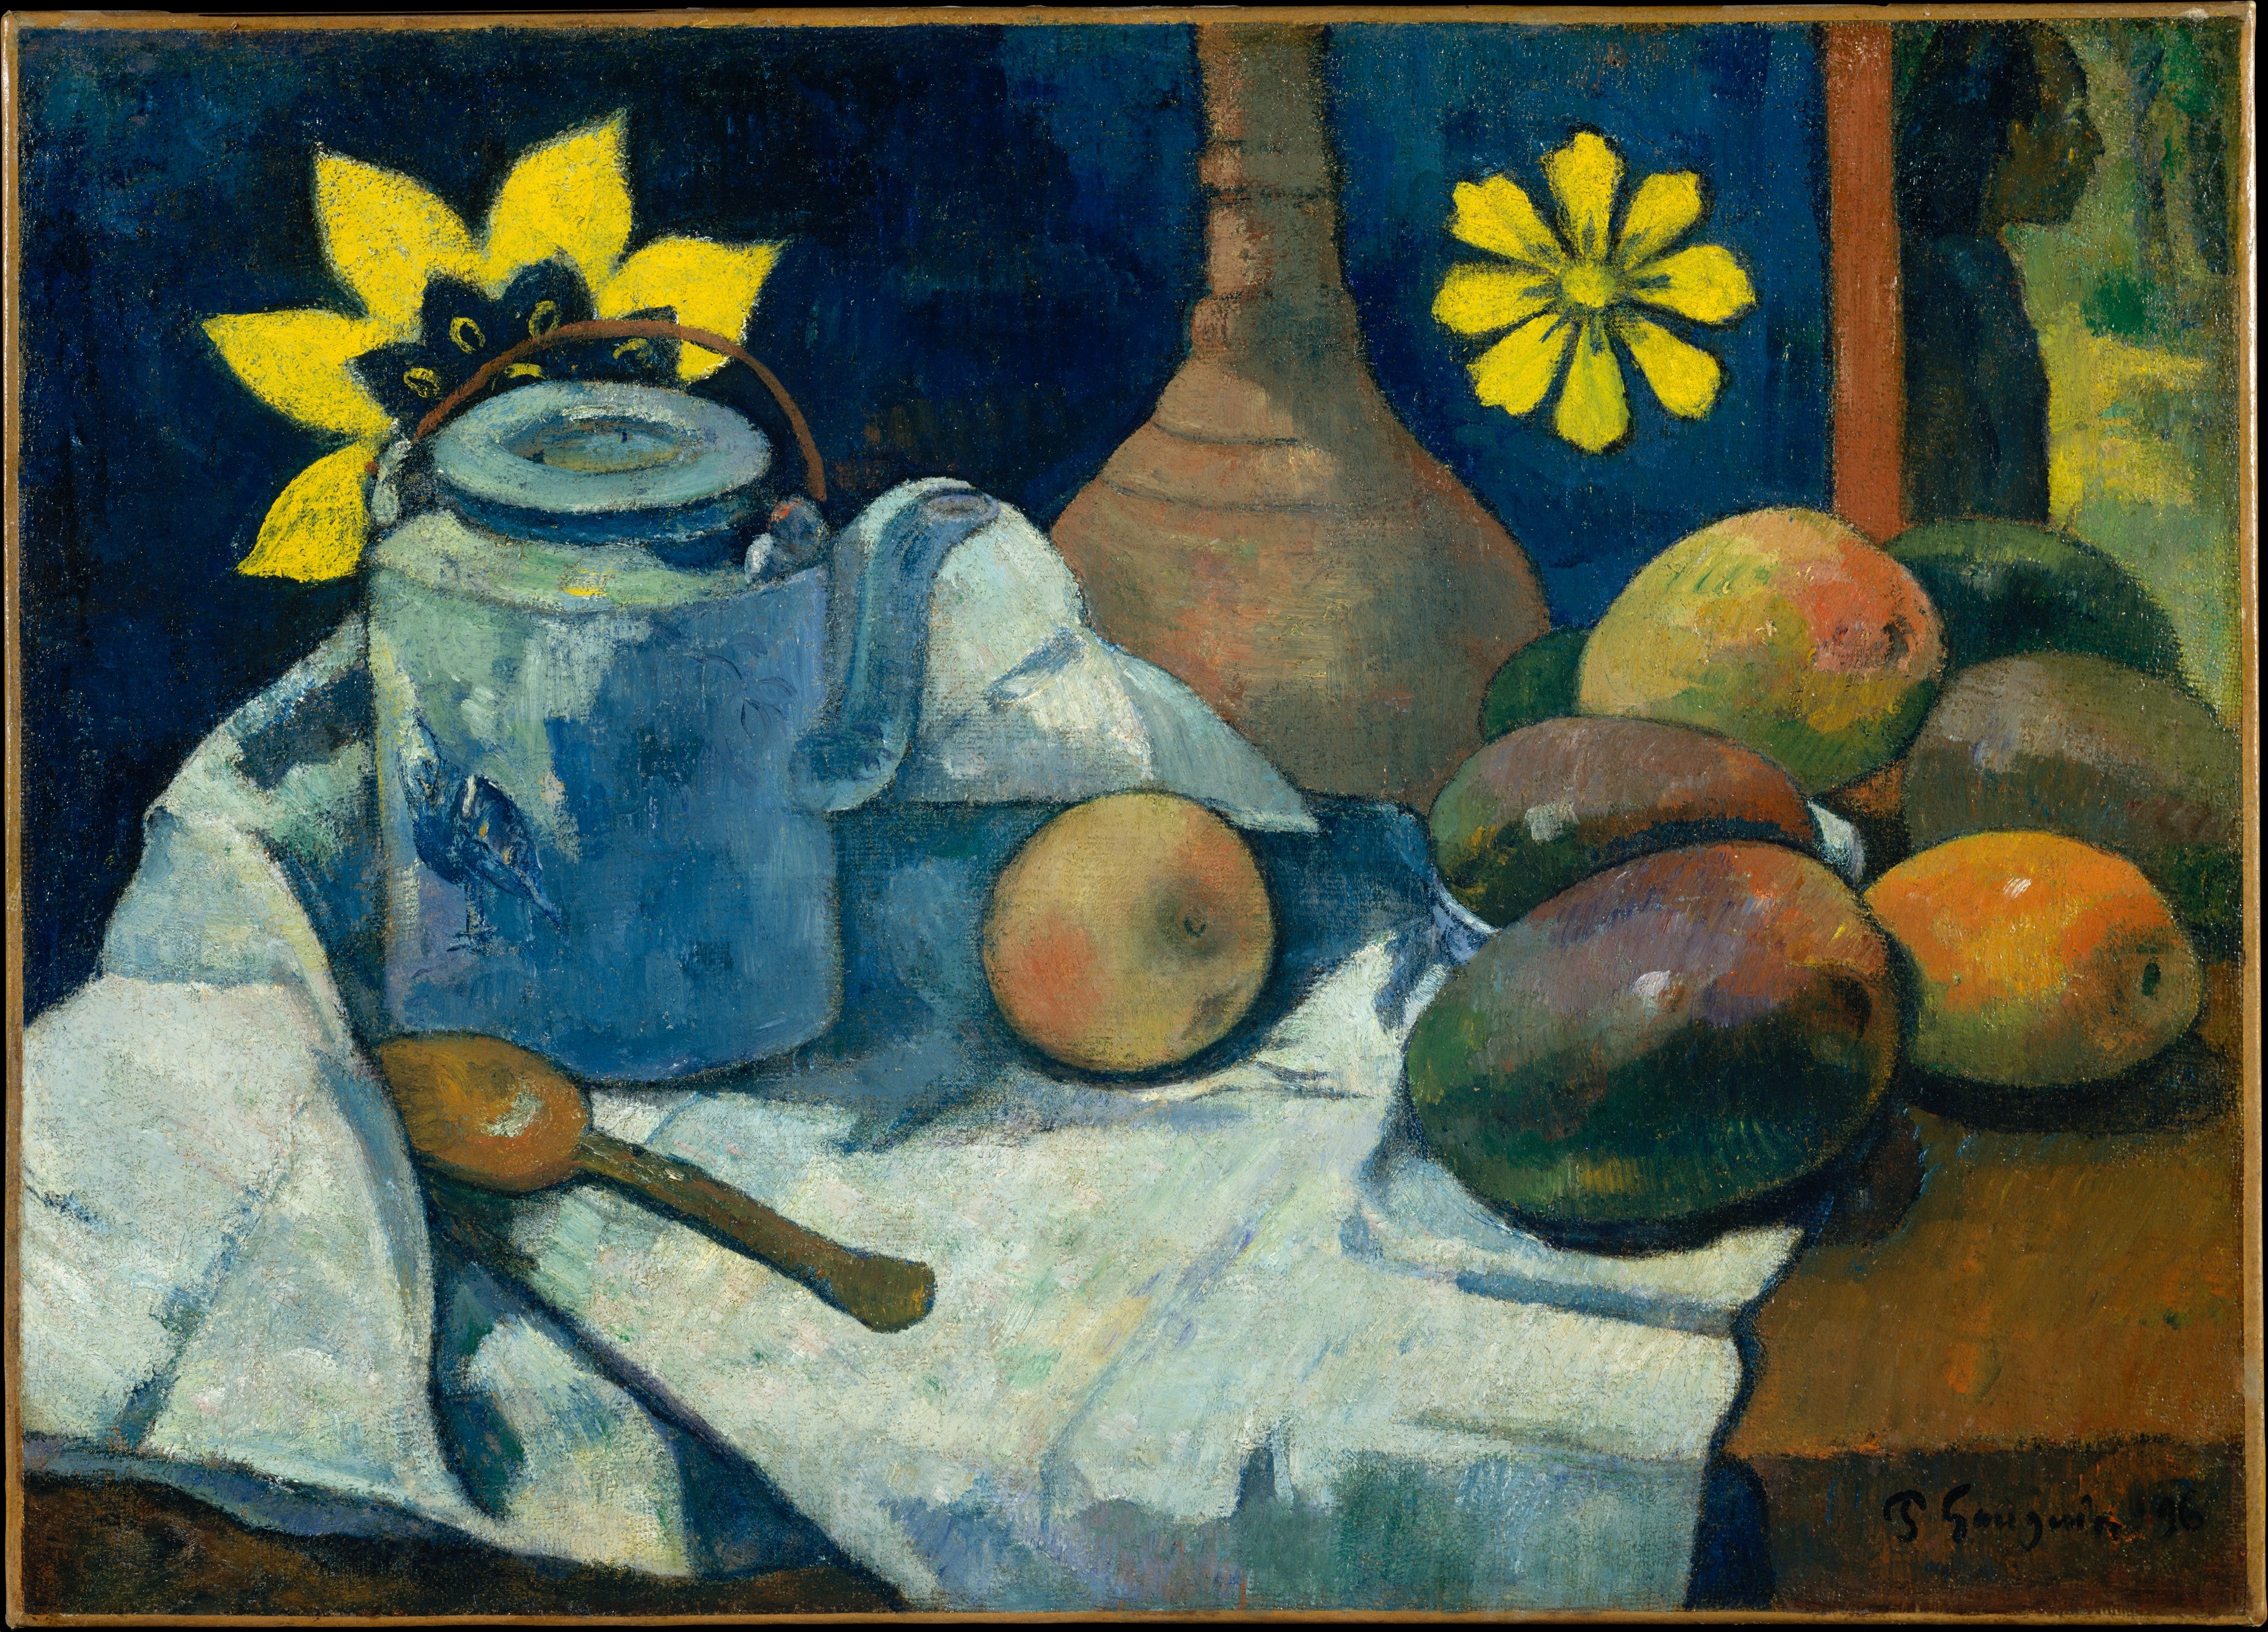 Paul Gauguin - Still Life with Teapot and Fruit - 1896